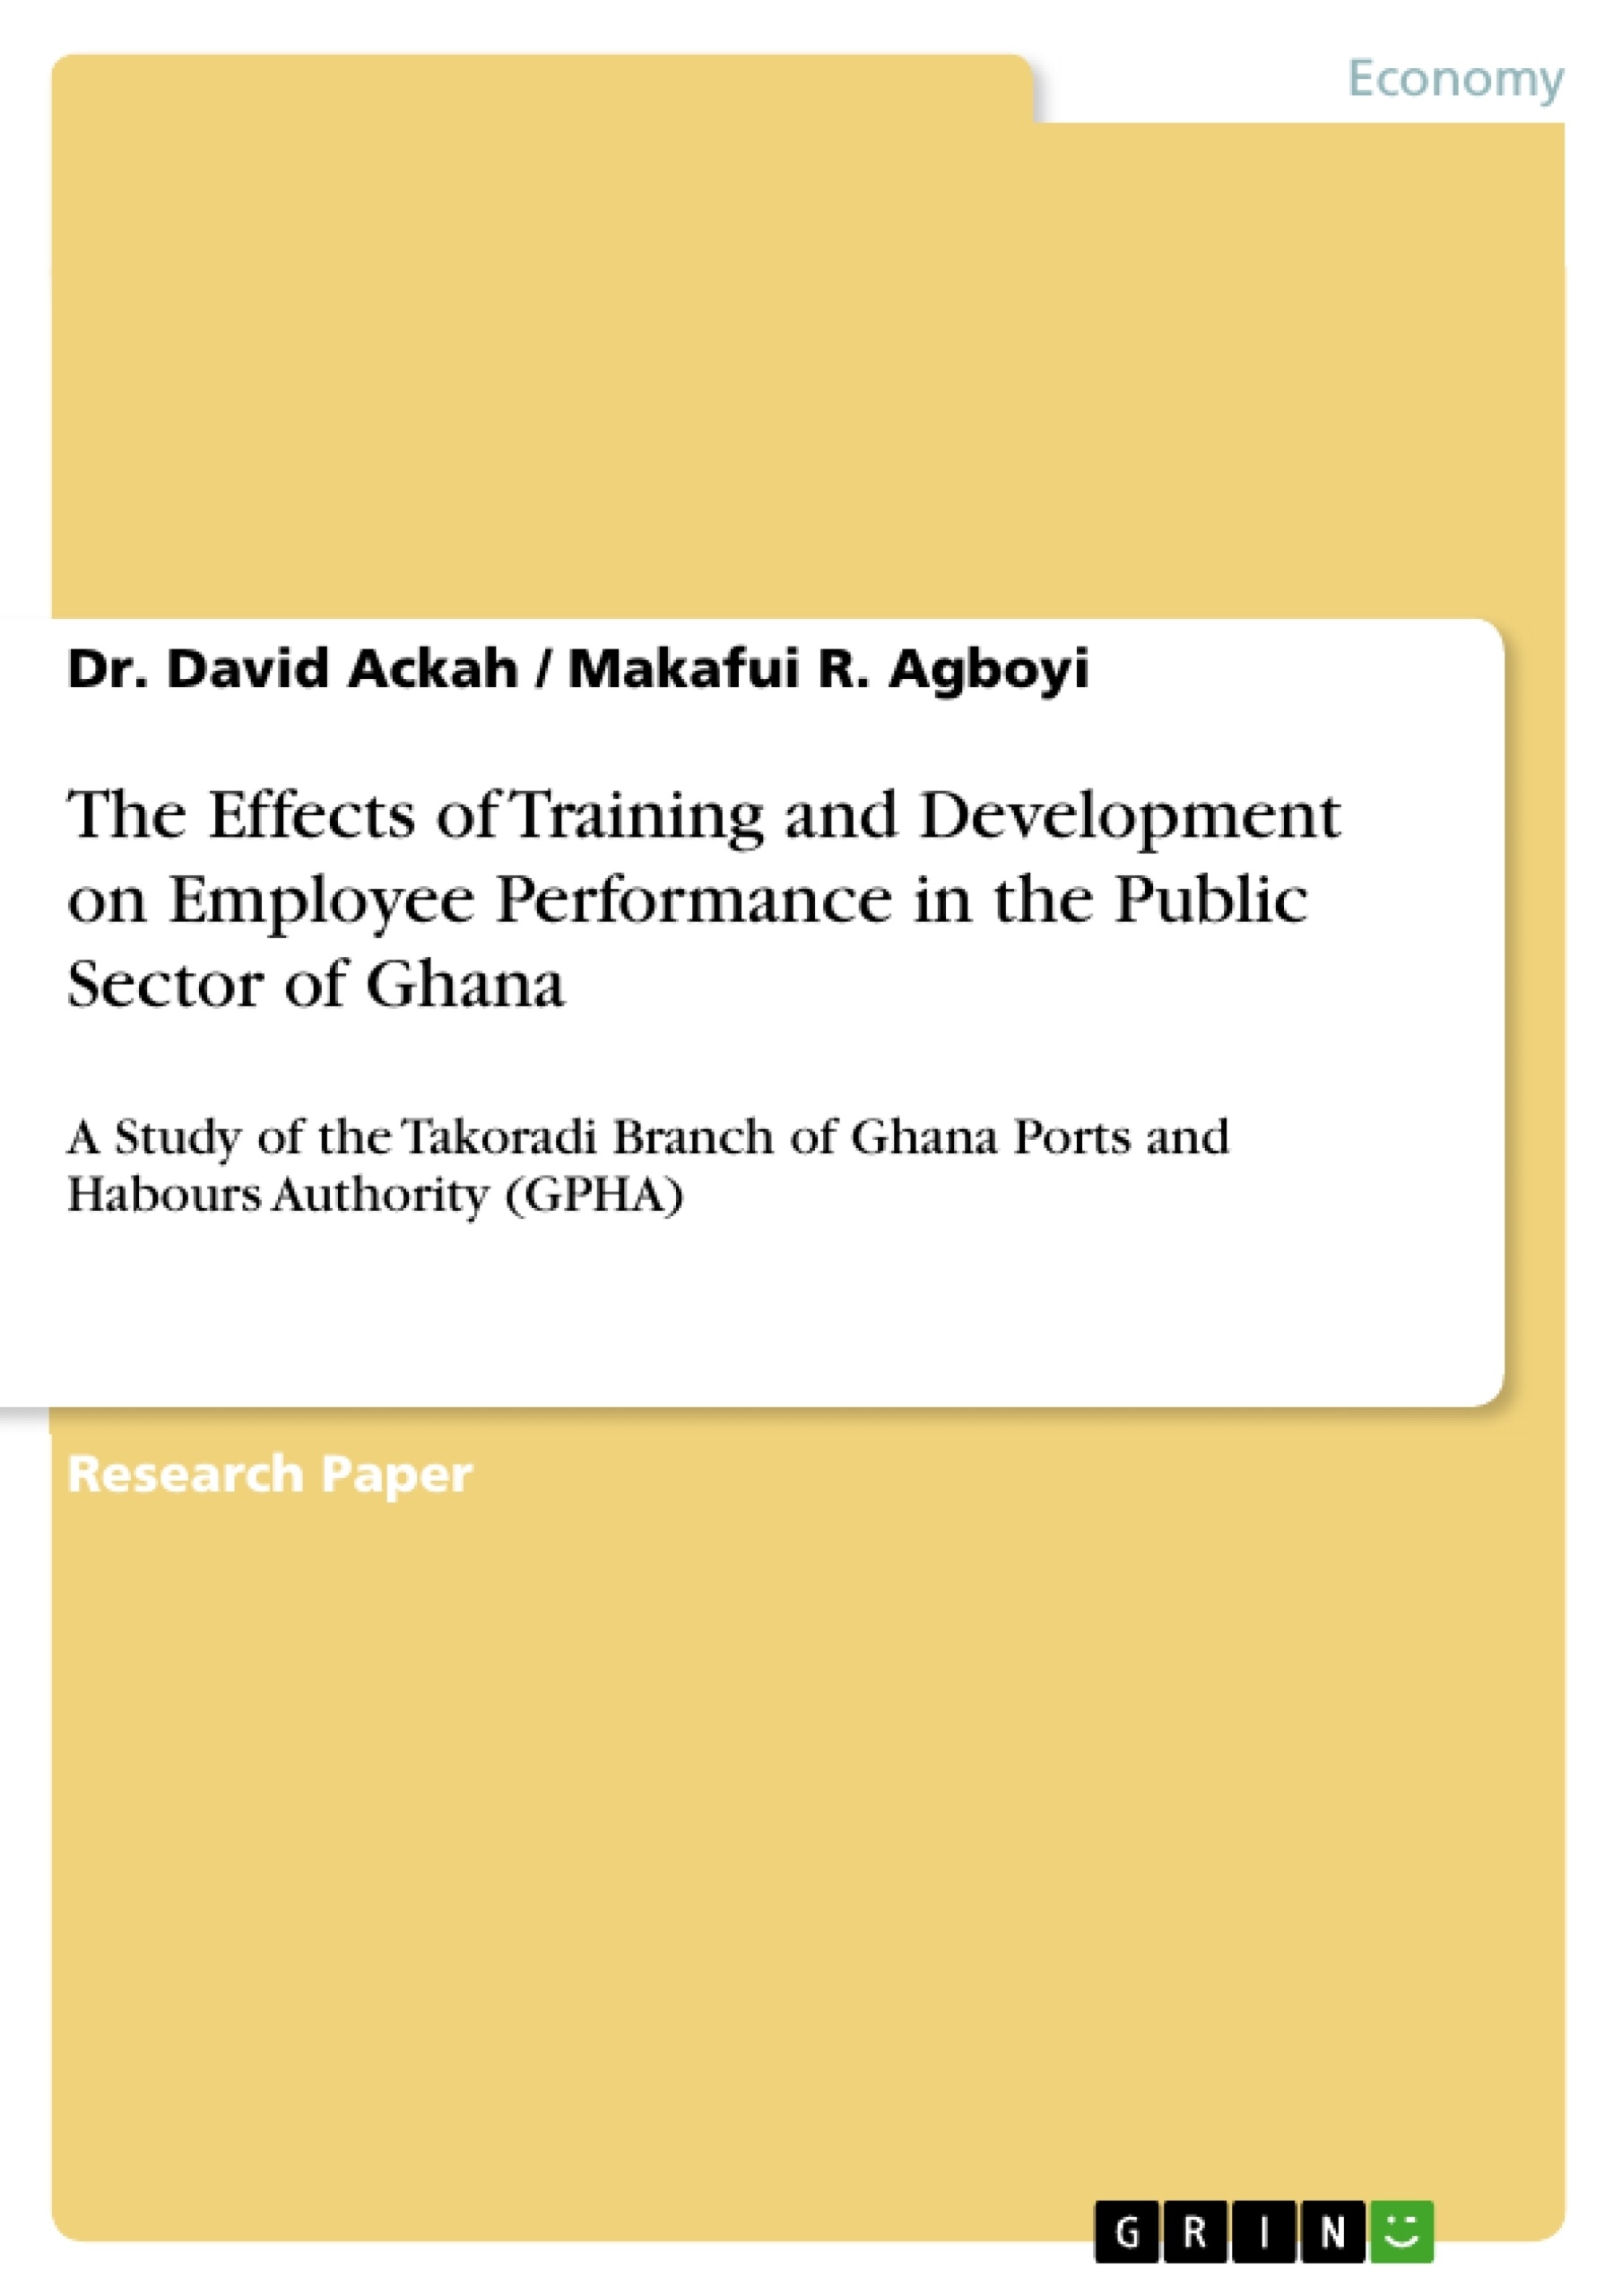 Title: The Effects of Training and Development on Employee Performance in the Public Sector of Ghana